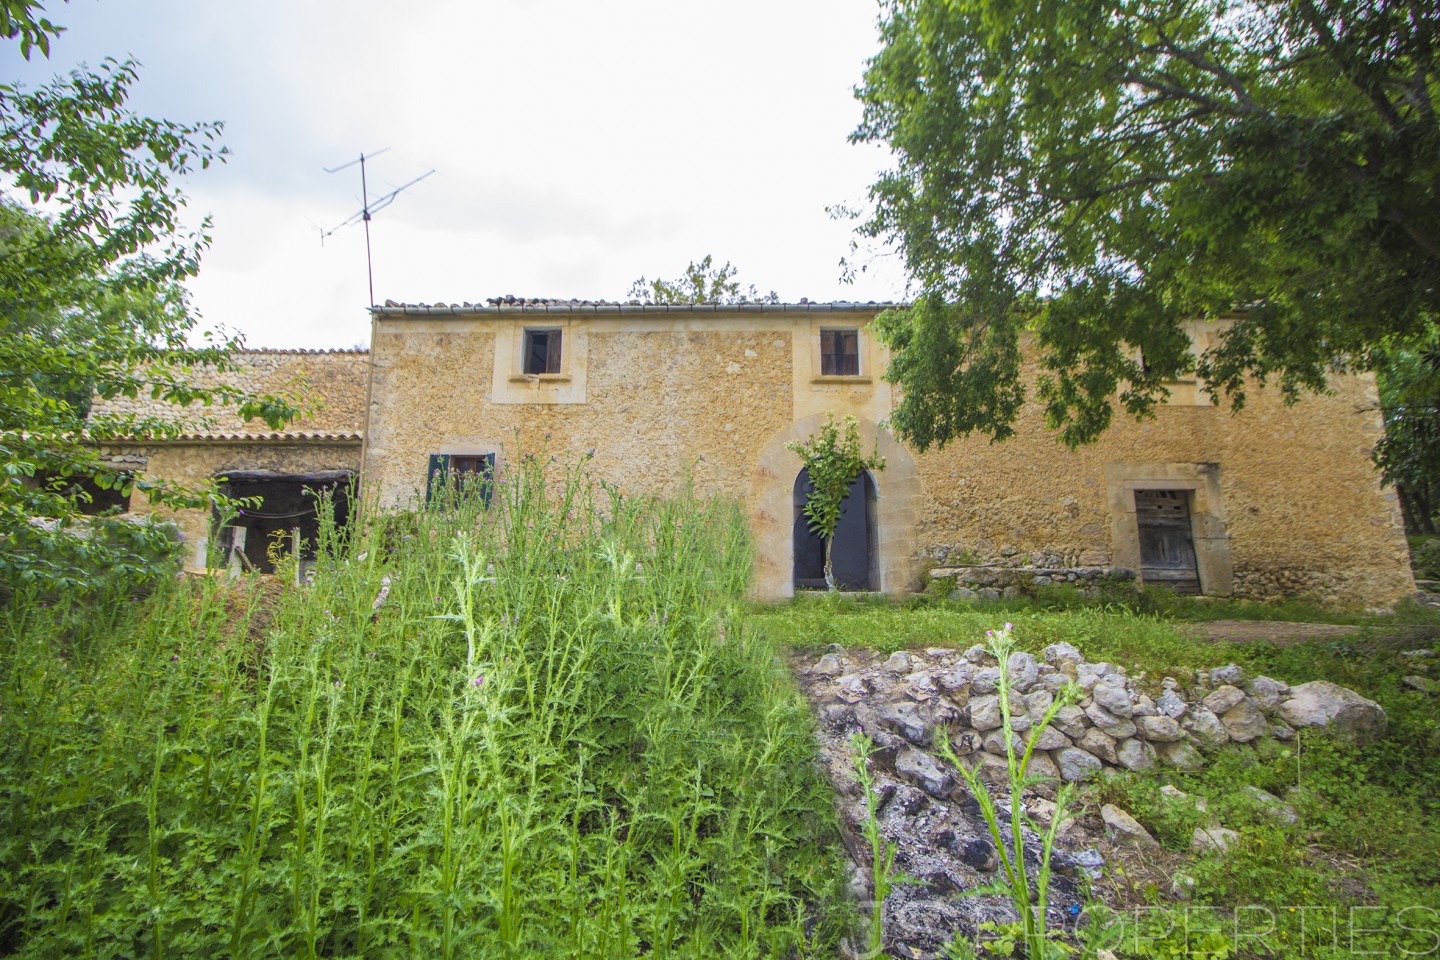 Large Historical property at 10 minutes distance from Pollensa Old Town